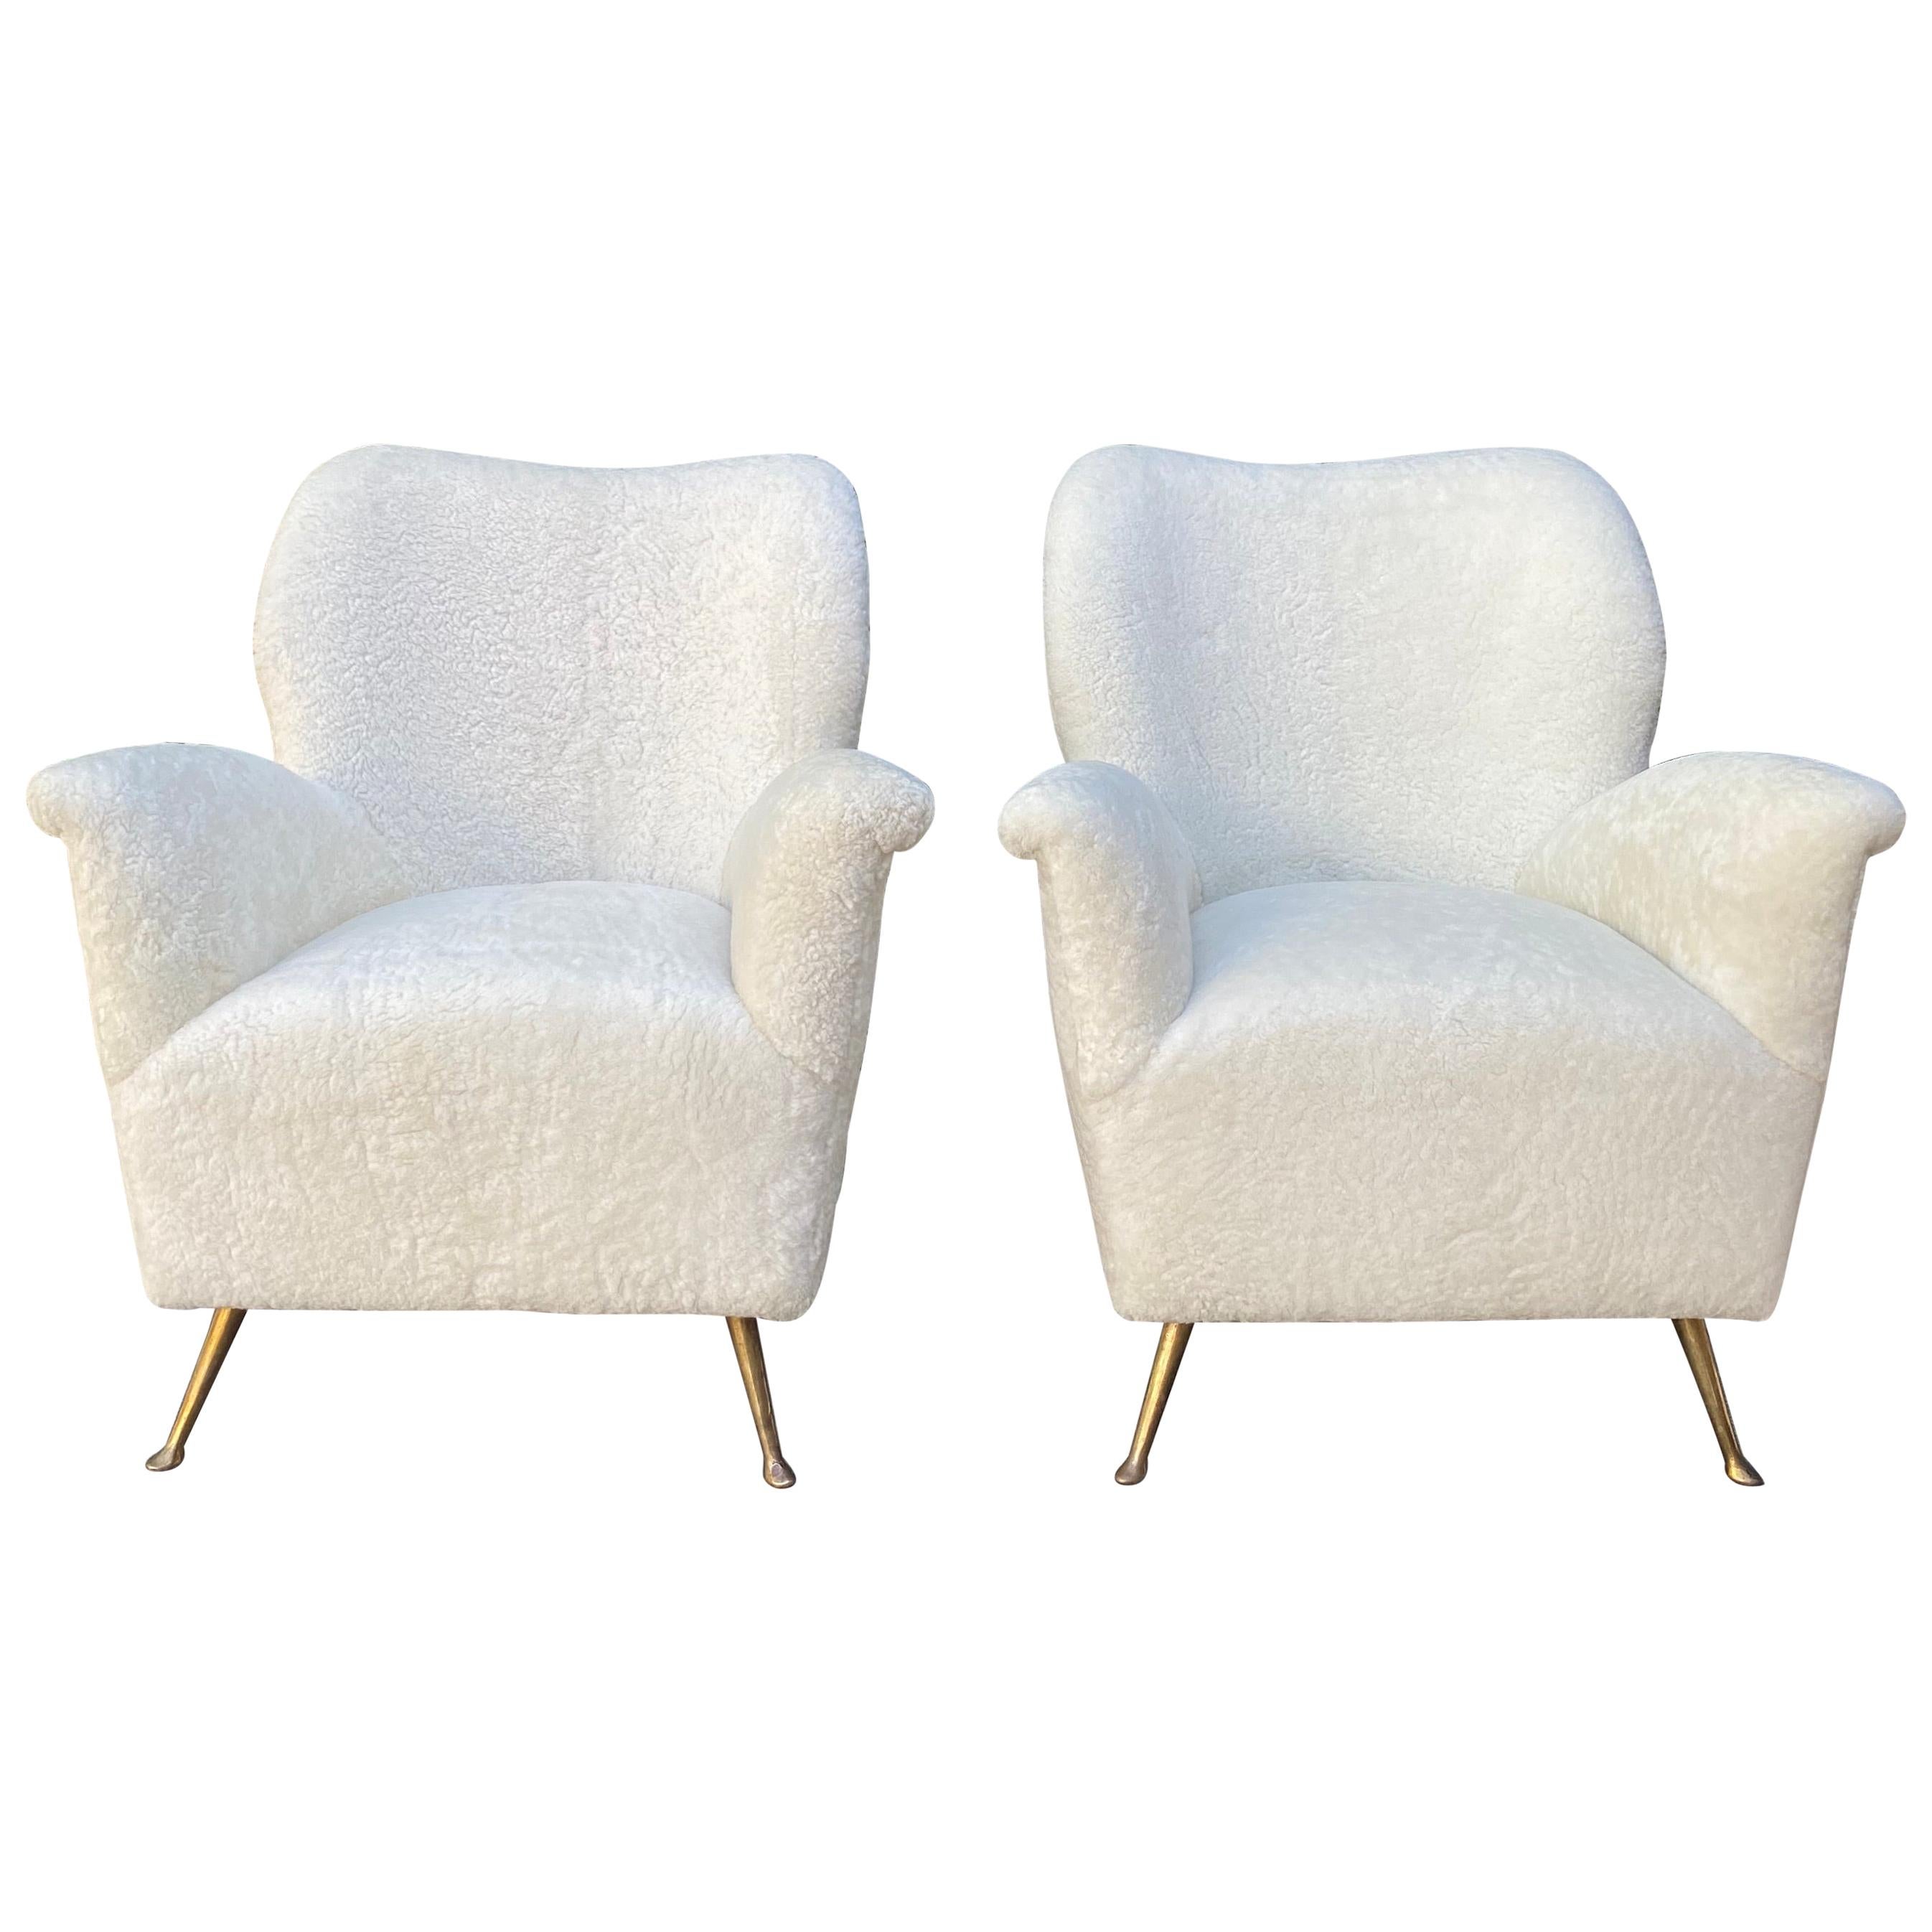 Pair of Curved Midcentury Lounge Chairs in White Curly Shearling